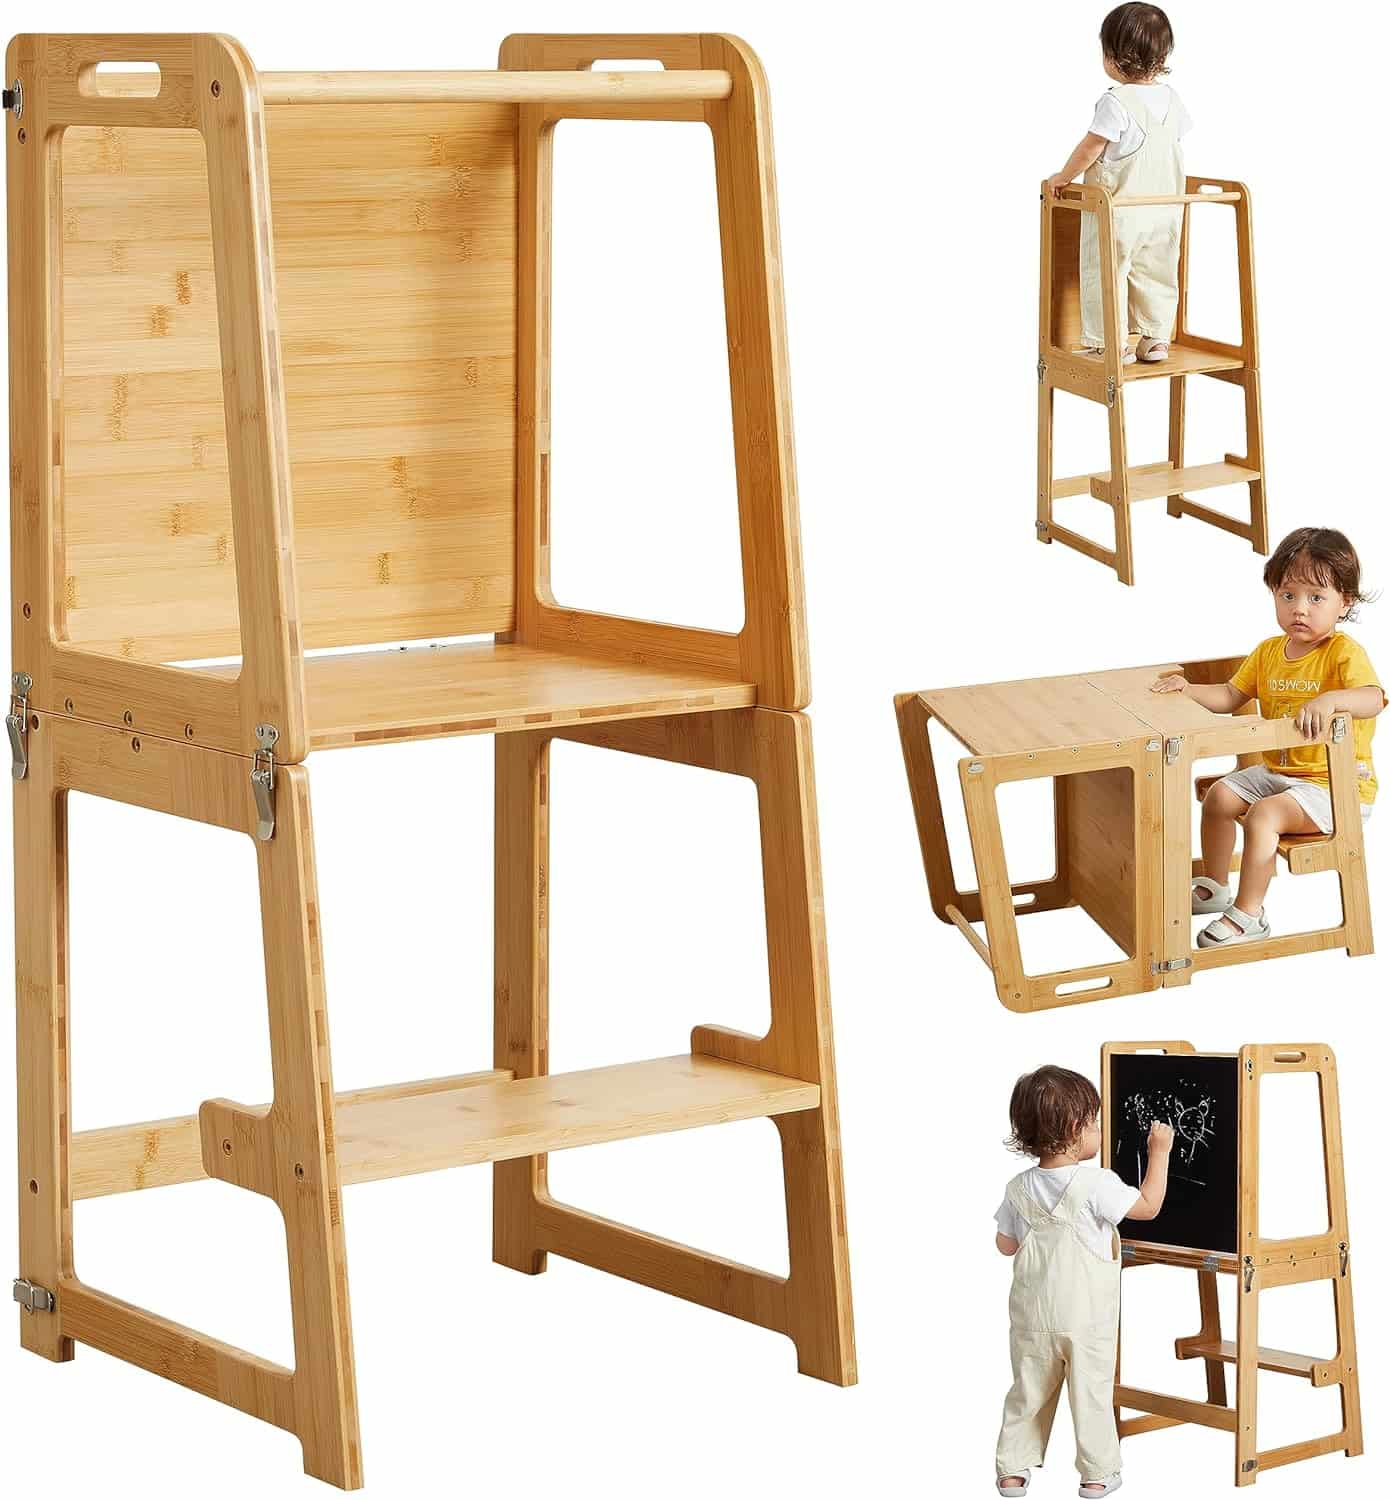 Onirw Store 4in1 Standing Tower for Toddlers